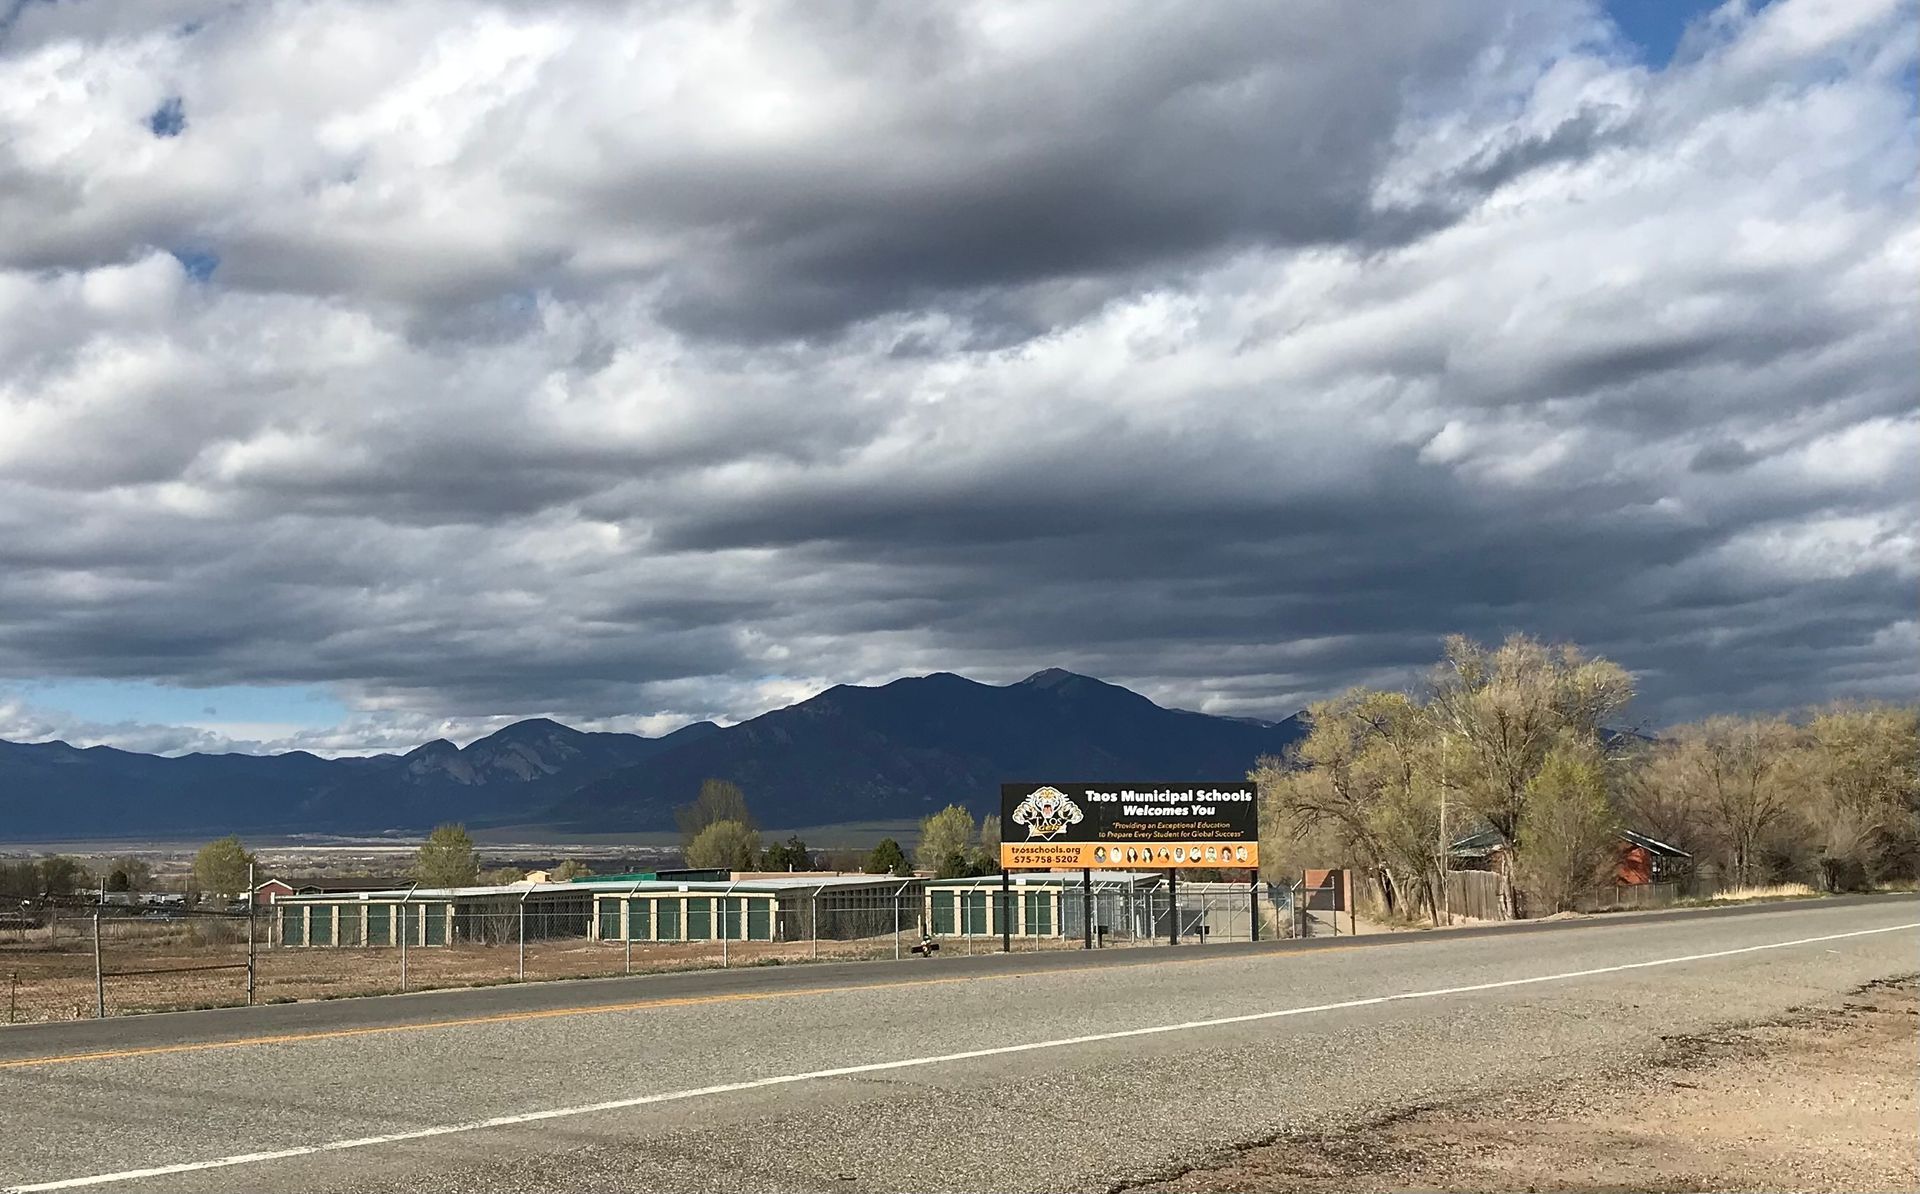 Best Price Storage Units in Ranchos de Taos as seen from across the street with a view of Taos Mountain behind them.